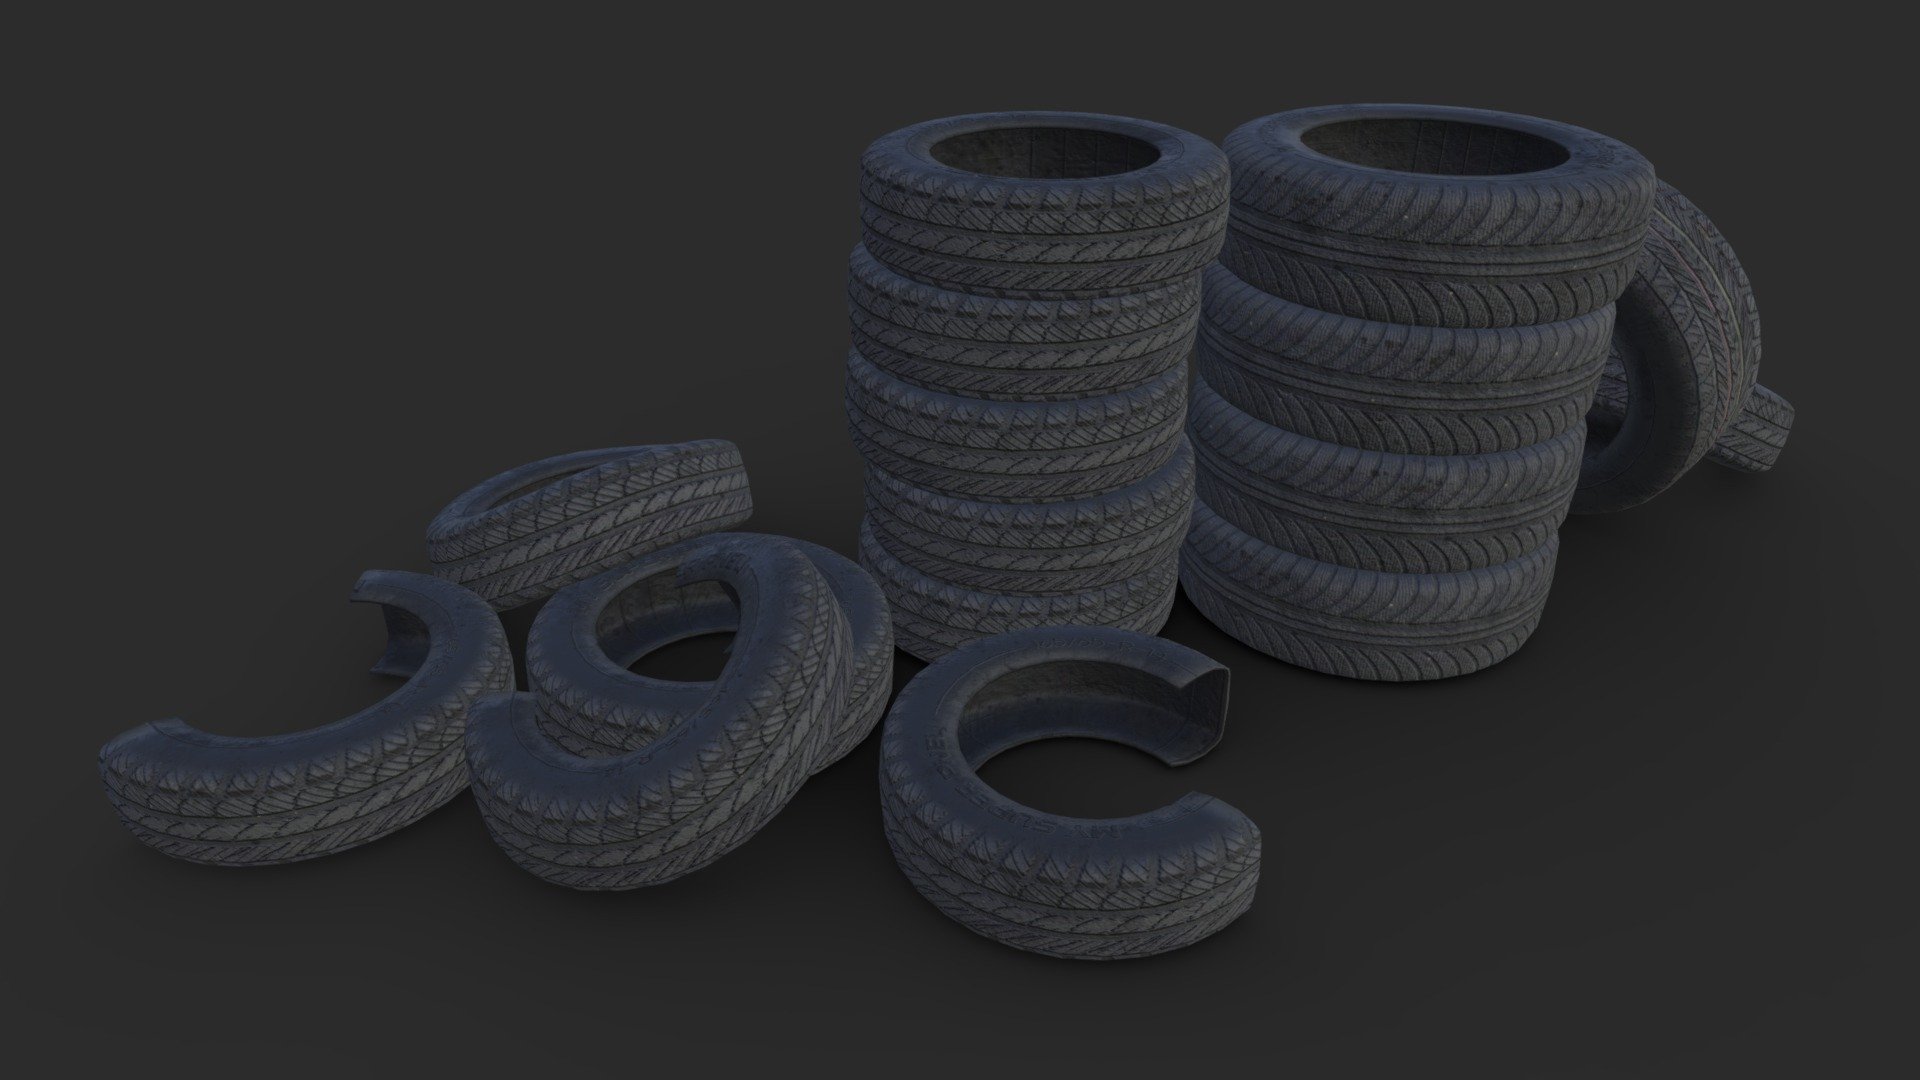 3D Assets of car tires. This collection includes 3 sizes of tires and 4 variants of destroyed tires for the smallest size. Each model has 3 LODs to be ready to use in any game engine as Unity or Unreal. Also, the collection includes 5 pre-assembled assets to embellish your 3D scenes and add details to make the scene or the game more realistic easily and quickly.



Low-poly model &amp; Blender native 2.81

SPECIFICATIONS

Objects : 7
Polygons : 5040
Subdivision ready : Yes
Render engine : Eevee (Cycles ready)

GAME SPECS

LODs : Yes
Number of LODs : 3
Collider : No
Pre-assembled Assets : 5

EXPORTED FORMATS

FBX
Collada
OBJ

TEXTURES

Materials in scene : 1 (PBR ready)
Textures sizes : 2K
Textures types : Diffuse, Metallic, Roughness, Normal (DirectX &amp; OpenGL), Heigh and AO
Textures format : PNG

GENERAL

Real scale : Yes
Scene objects are organized by groups - Tires Asset - Buy Royalty Free 3D model by KangaroOz 3D (@KangaroOz-3D) 3d model